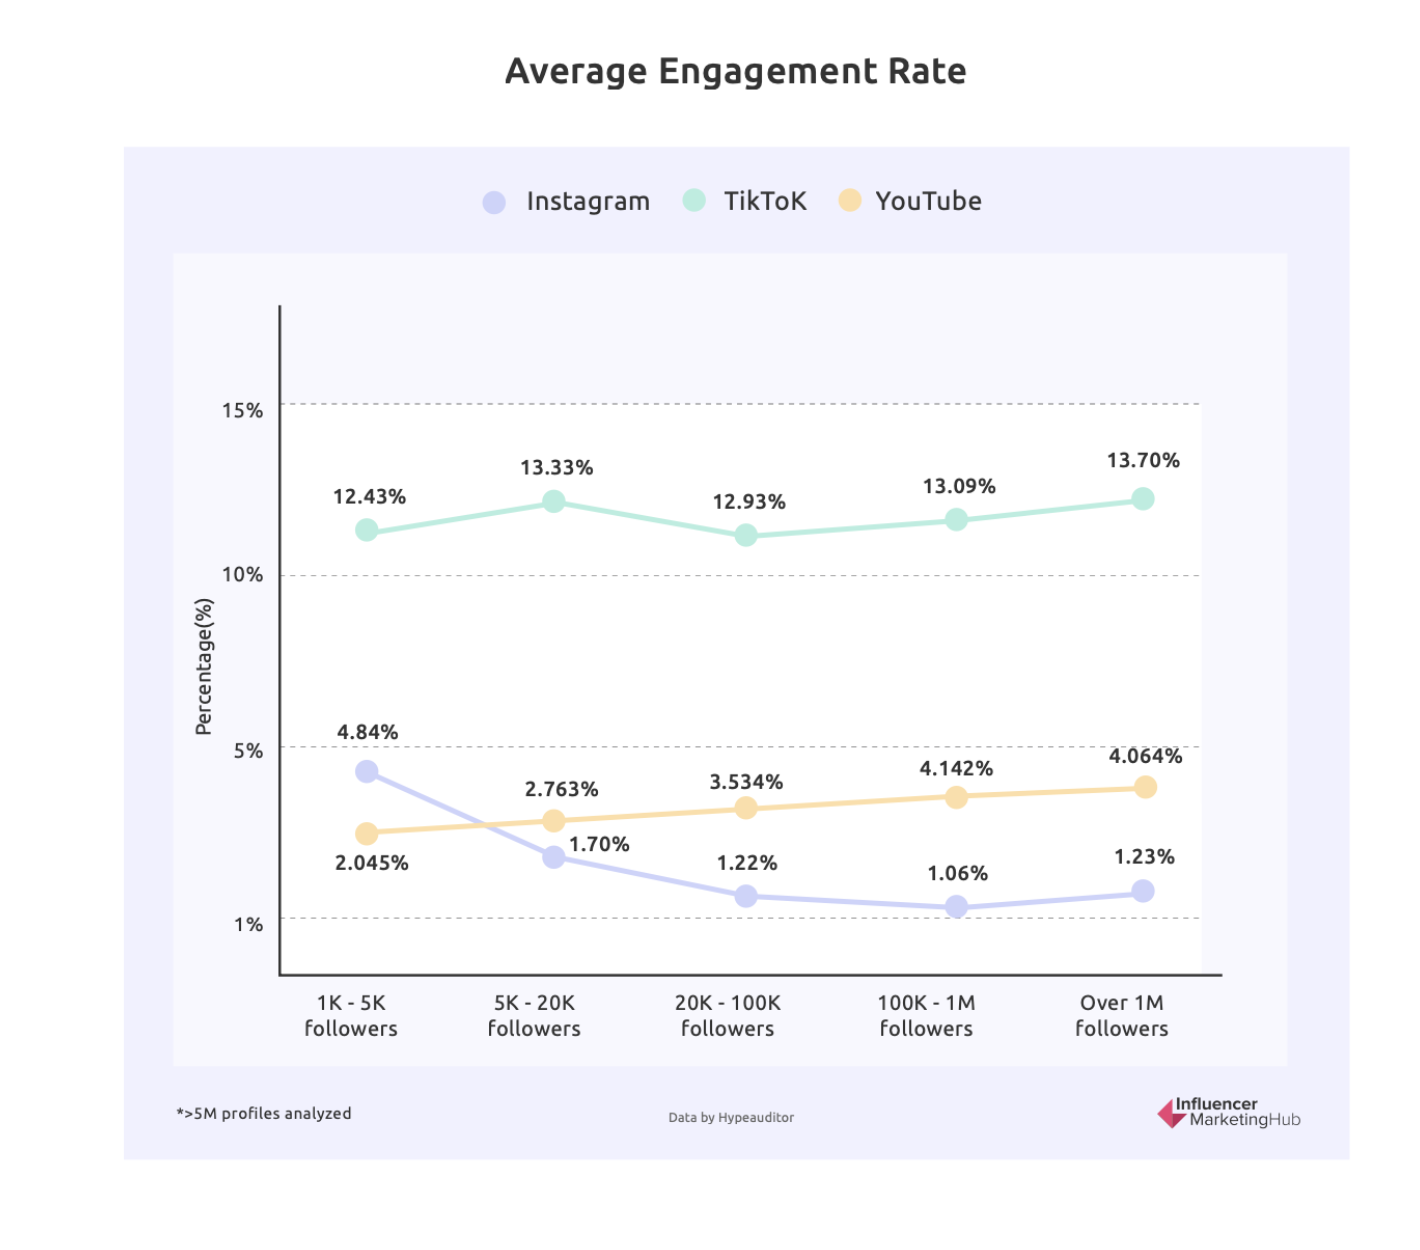 Average engagement rate for Instagram, Tiktok, and Youtube creators.